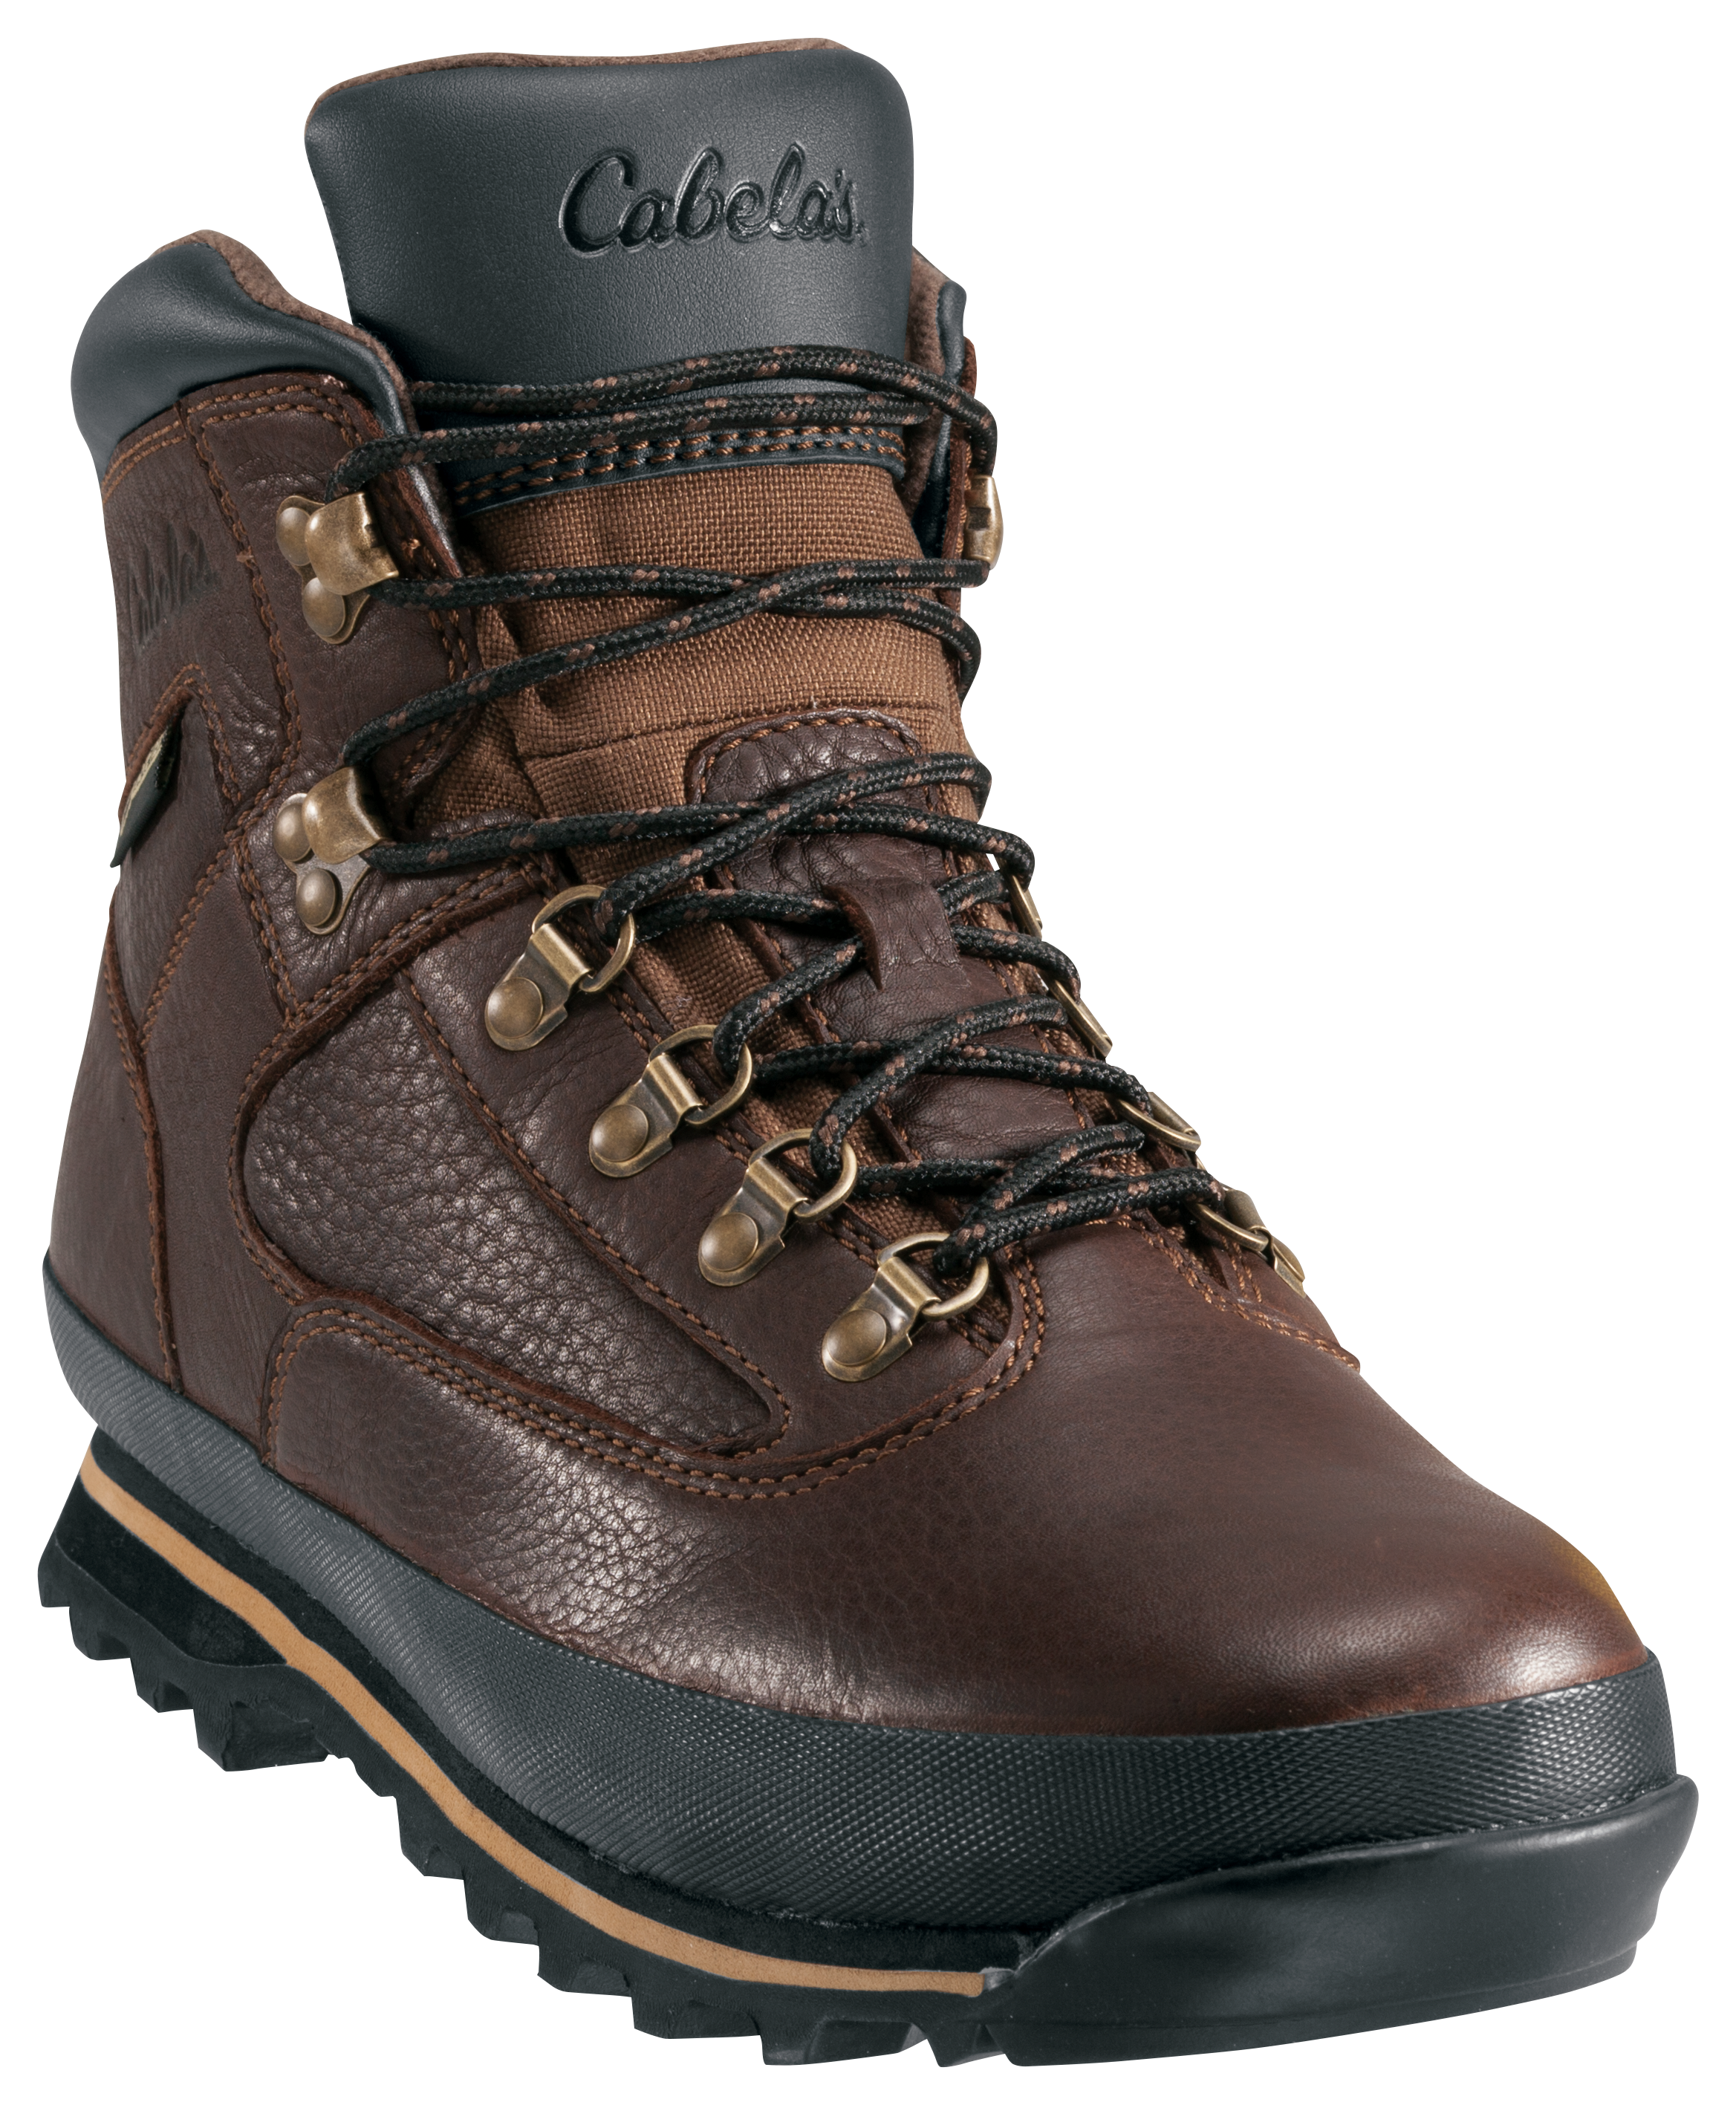 Cabela's Rimrock Mid GORE-TEX Hiking Boots for Men - Brown - 11M